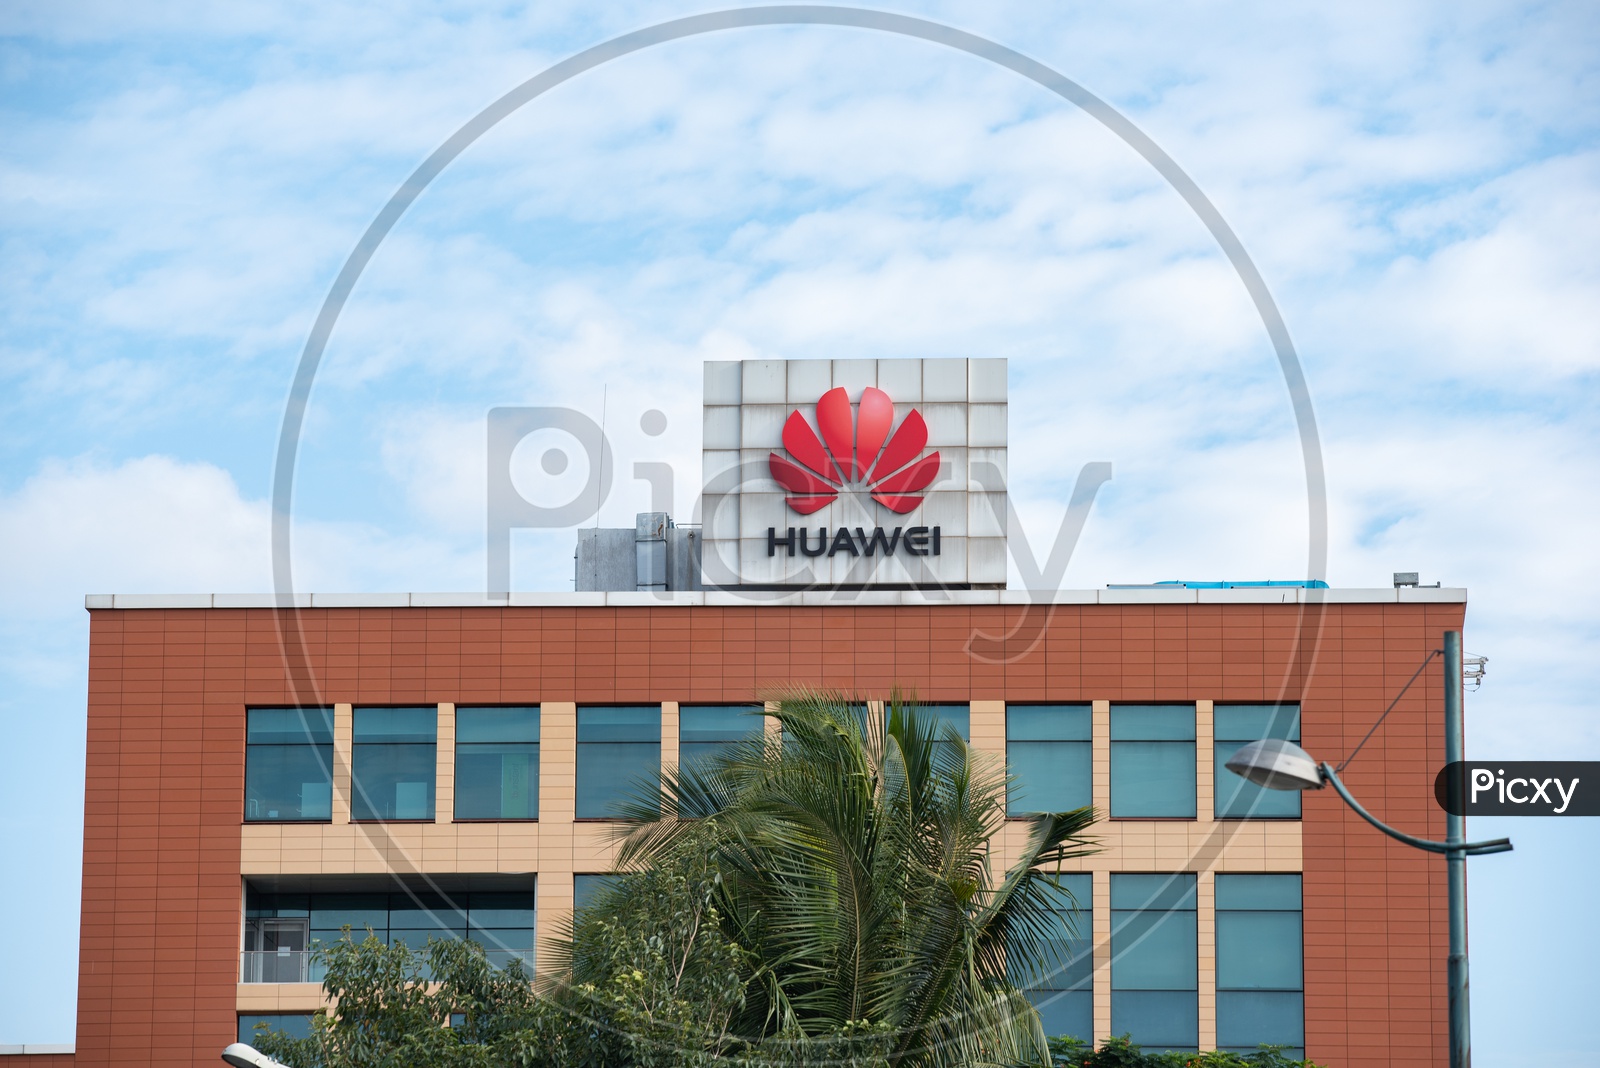 Image of Huawei Corporate Office-MJ741885-Picxy